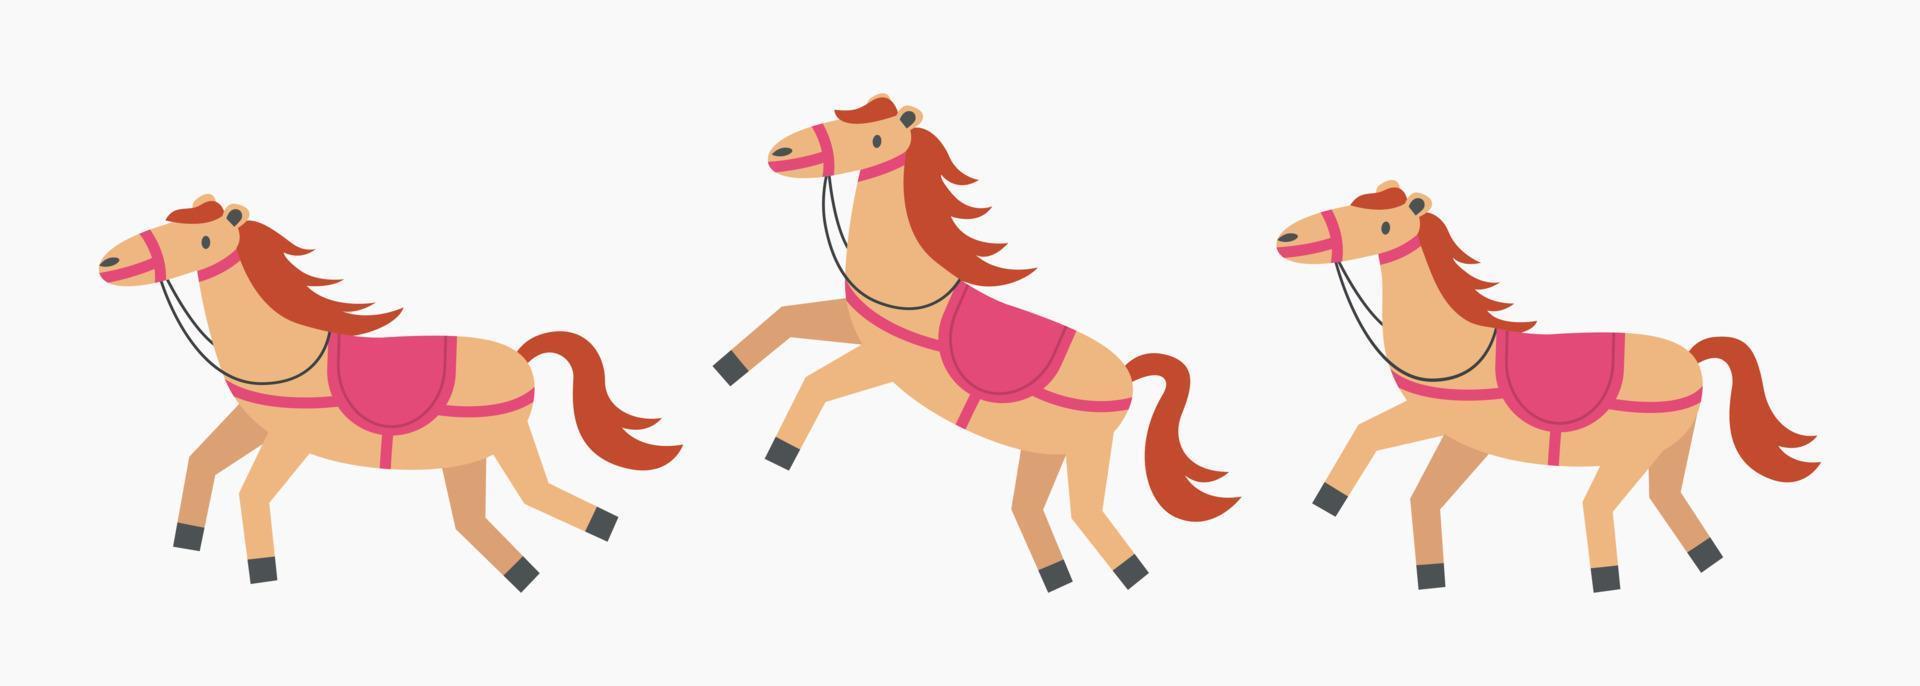 Set of horses in different poses. Cute pony in harness, saddle. Puffy character in motion for kids. Child ponytailed farm animal . Horseback riding, hippodrome racing, equestrian sport. vector